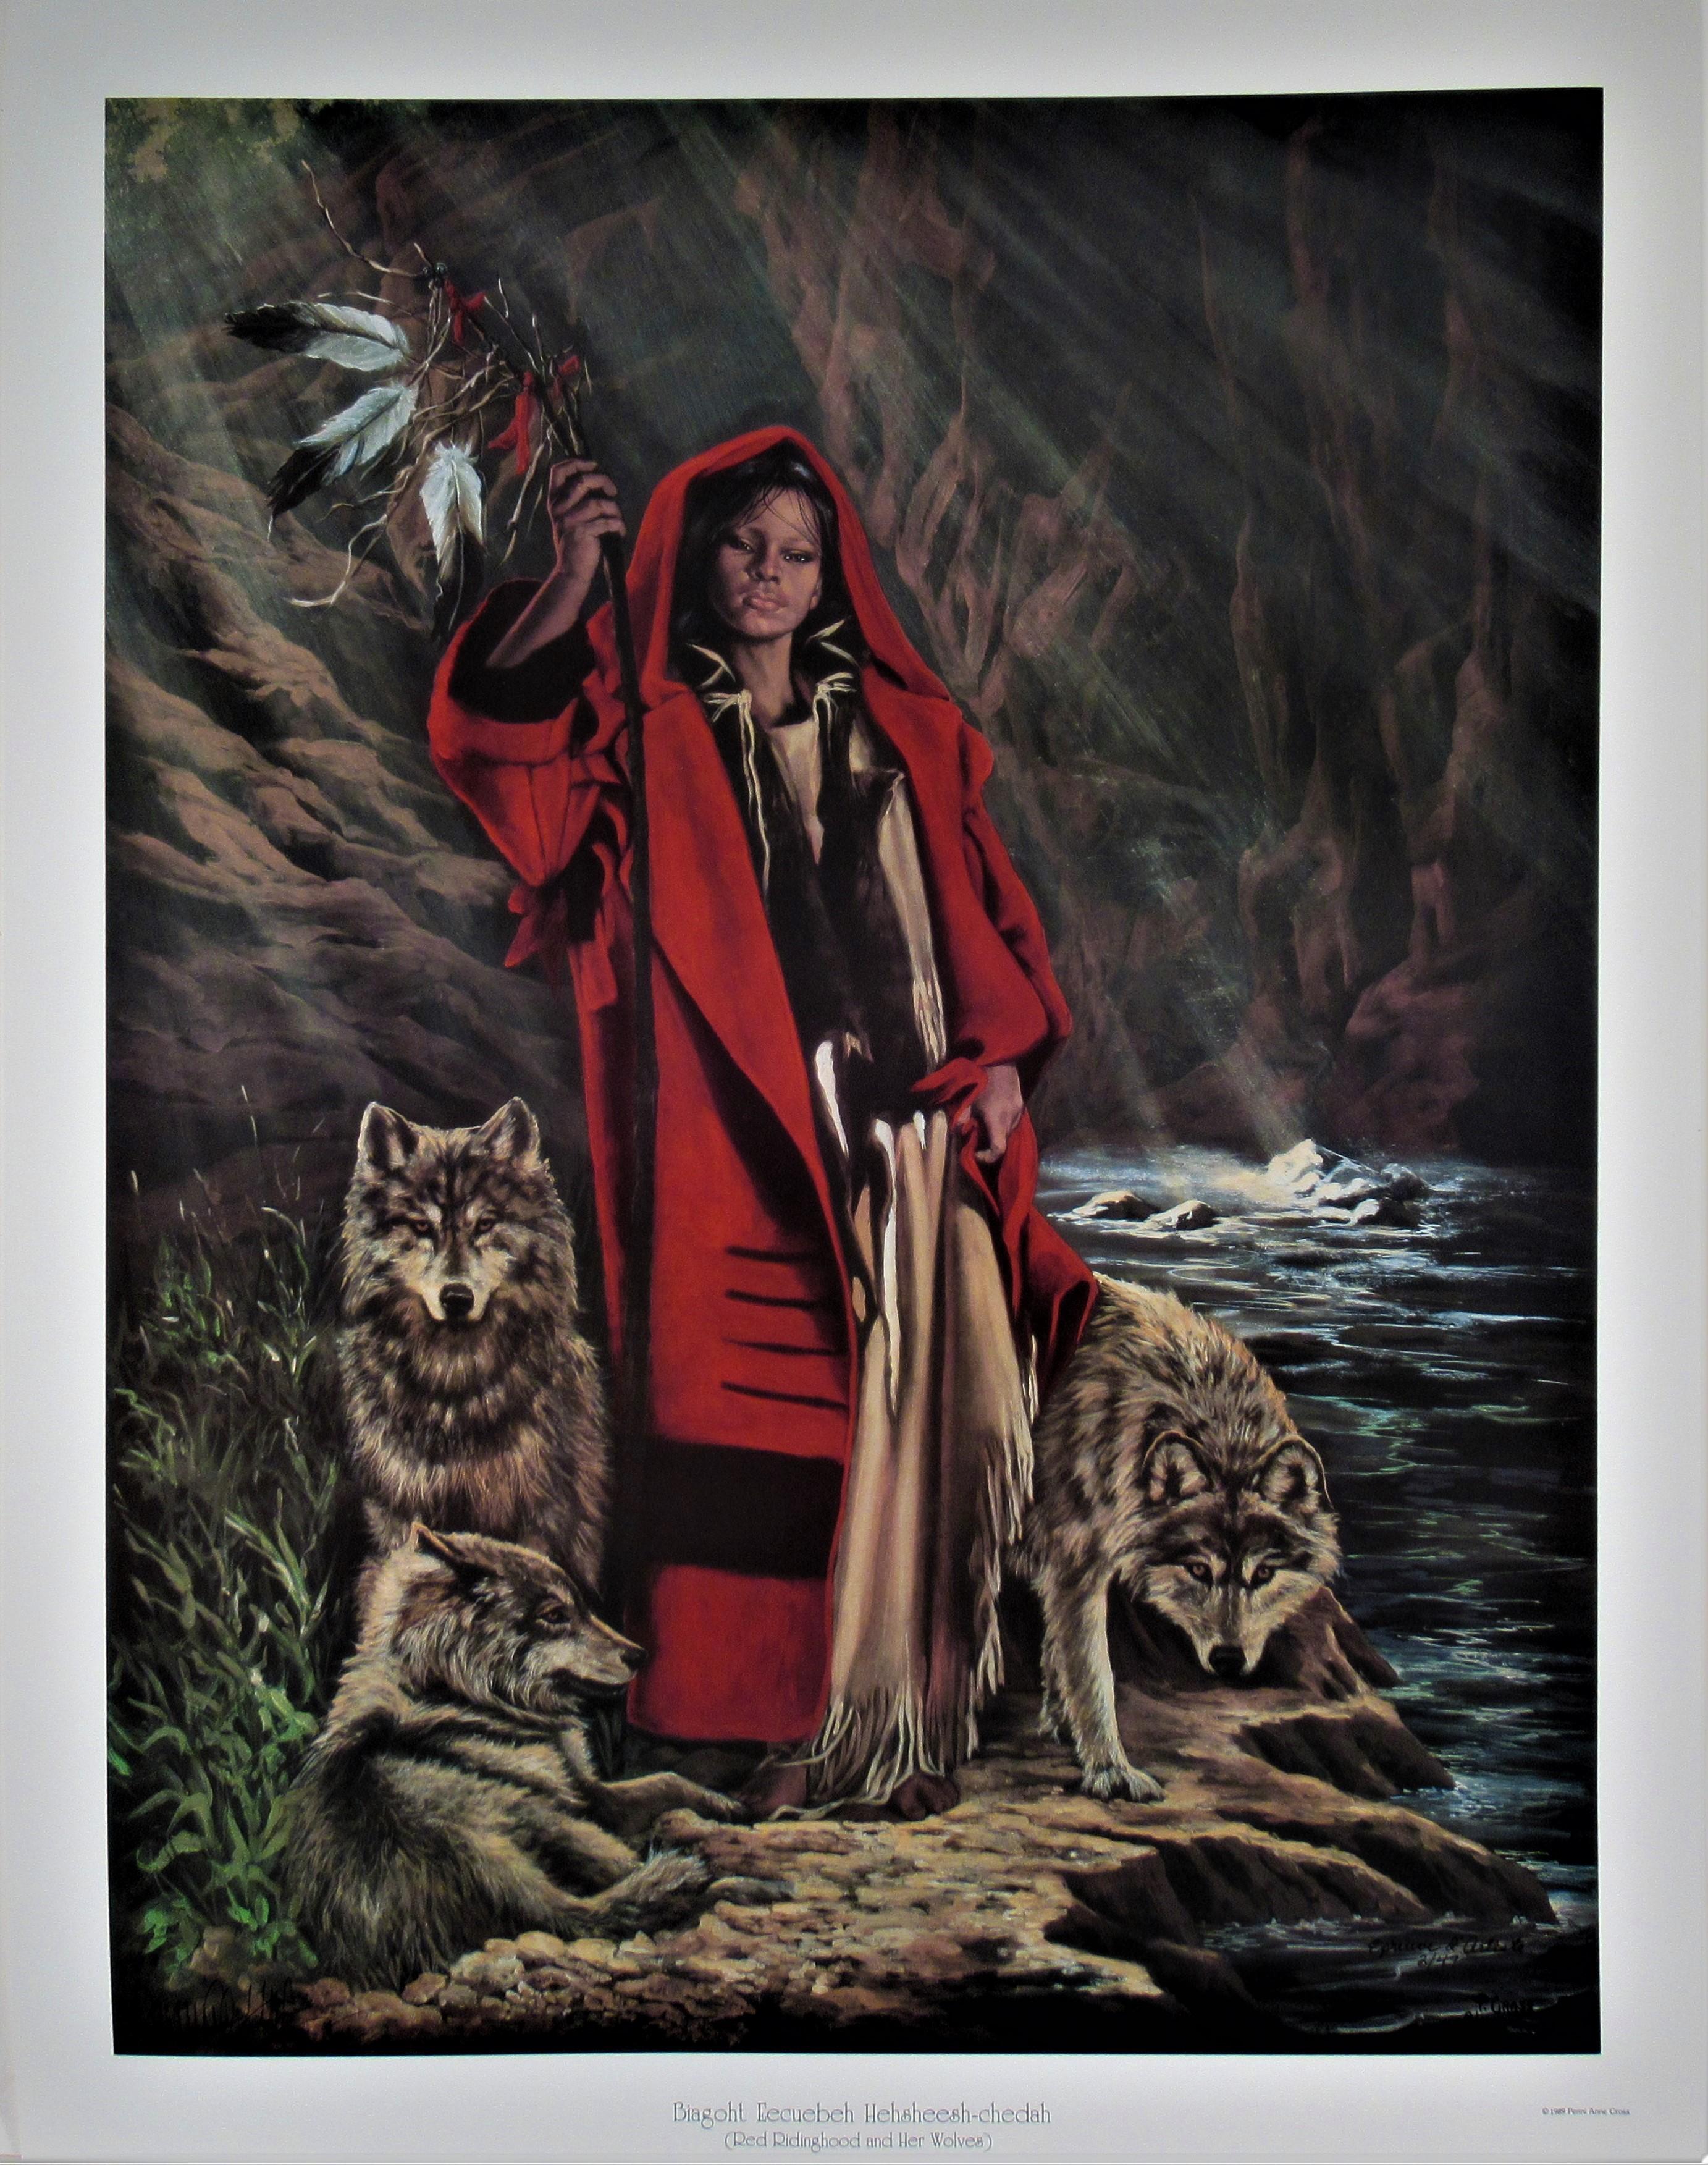 Penni Anne Cross Figurative Print -  Biagoth Eecuebeh Hehsheesh-Chedah (Red Ridinghood and her Wolves)